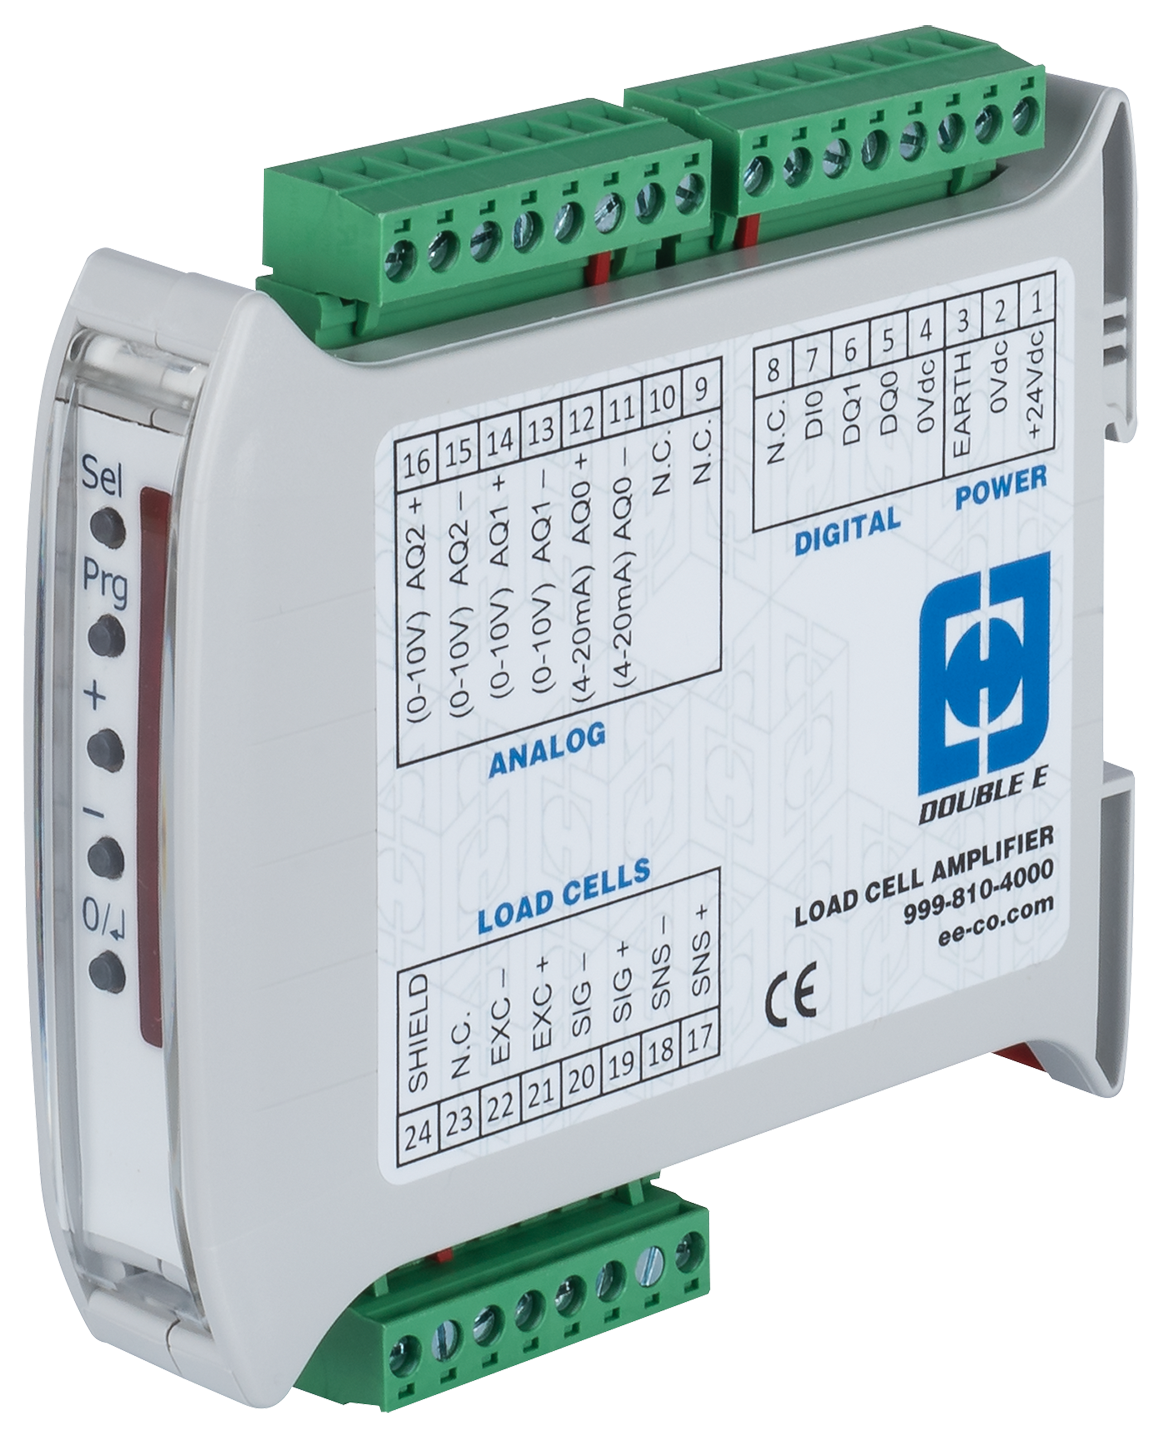 Web tension controllers and load cells from the Double E Company